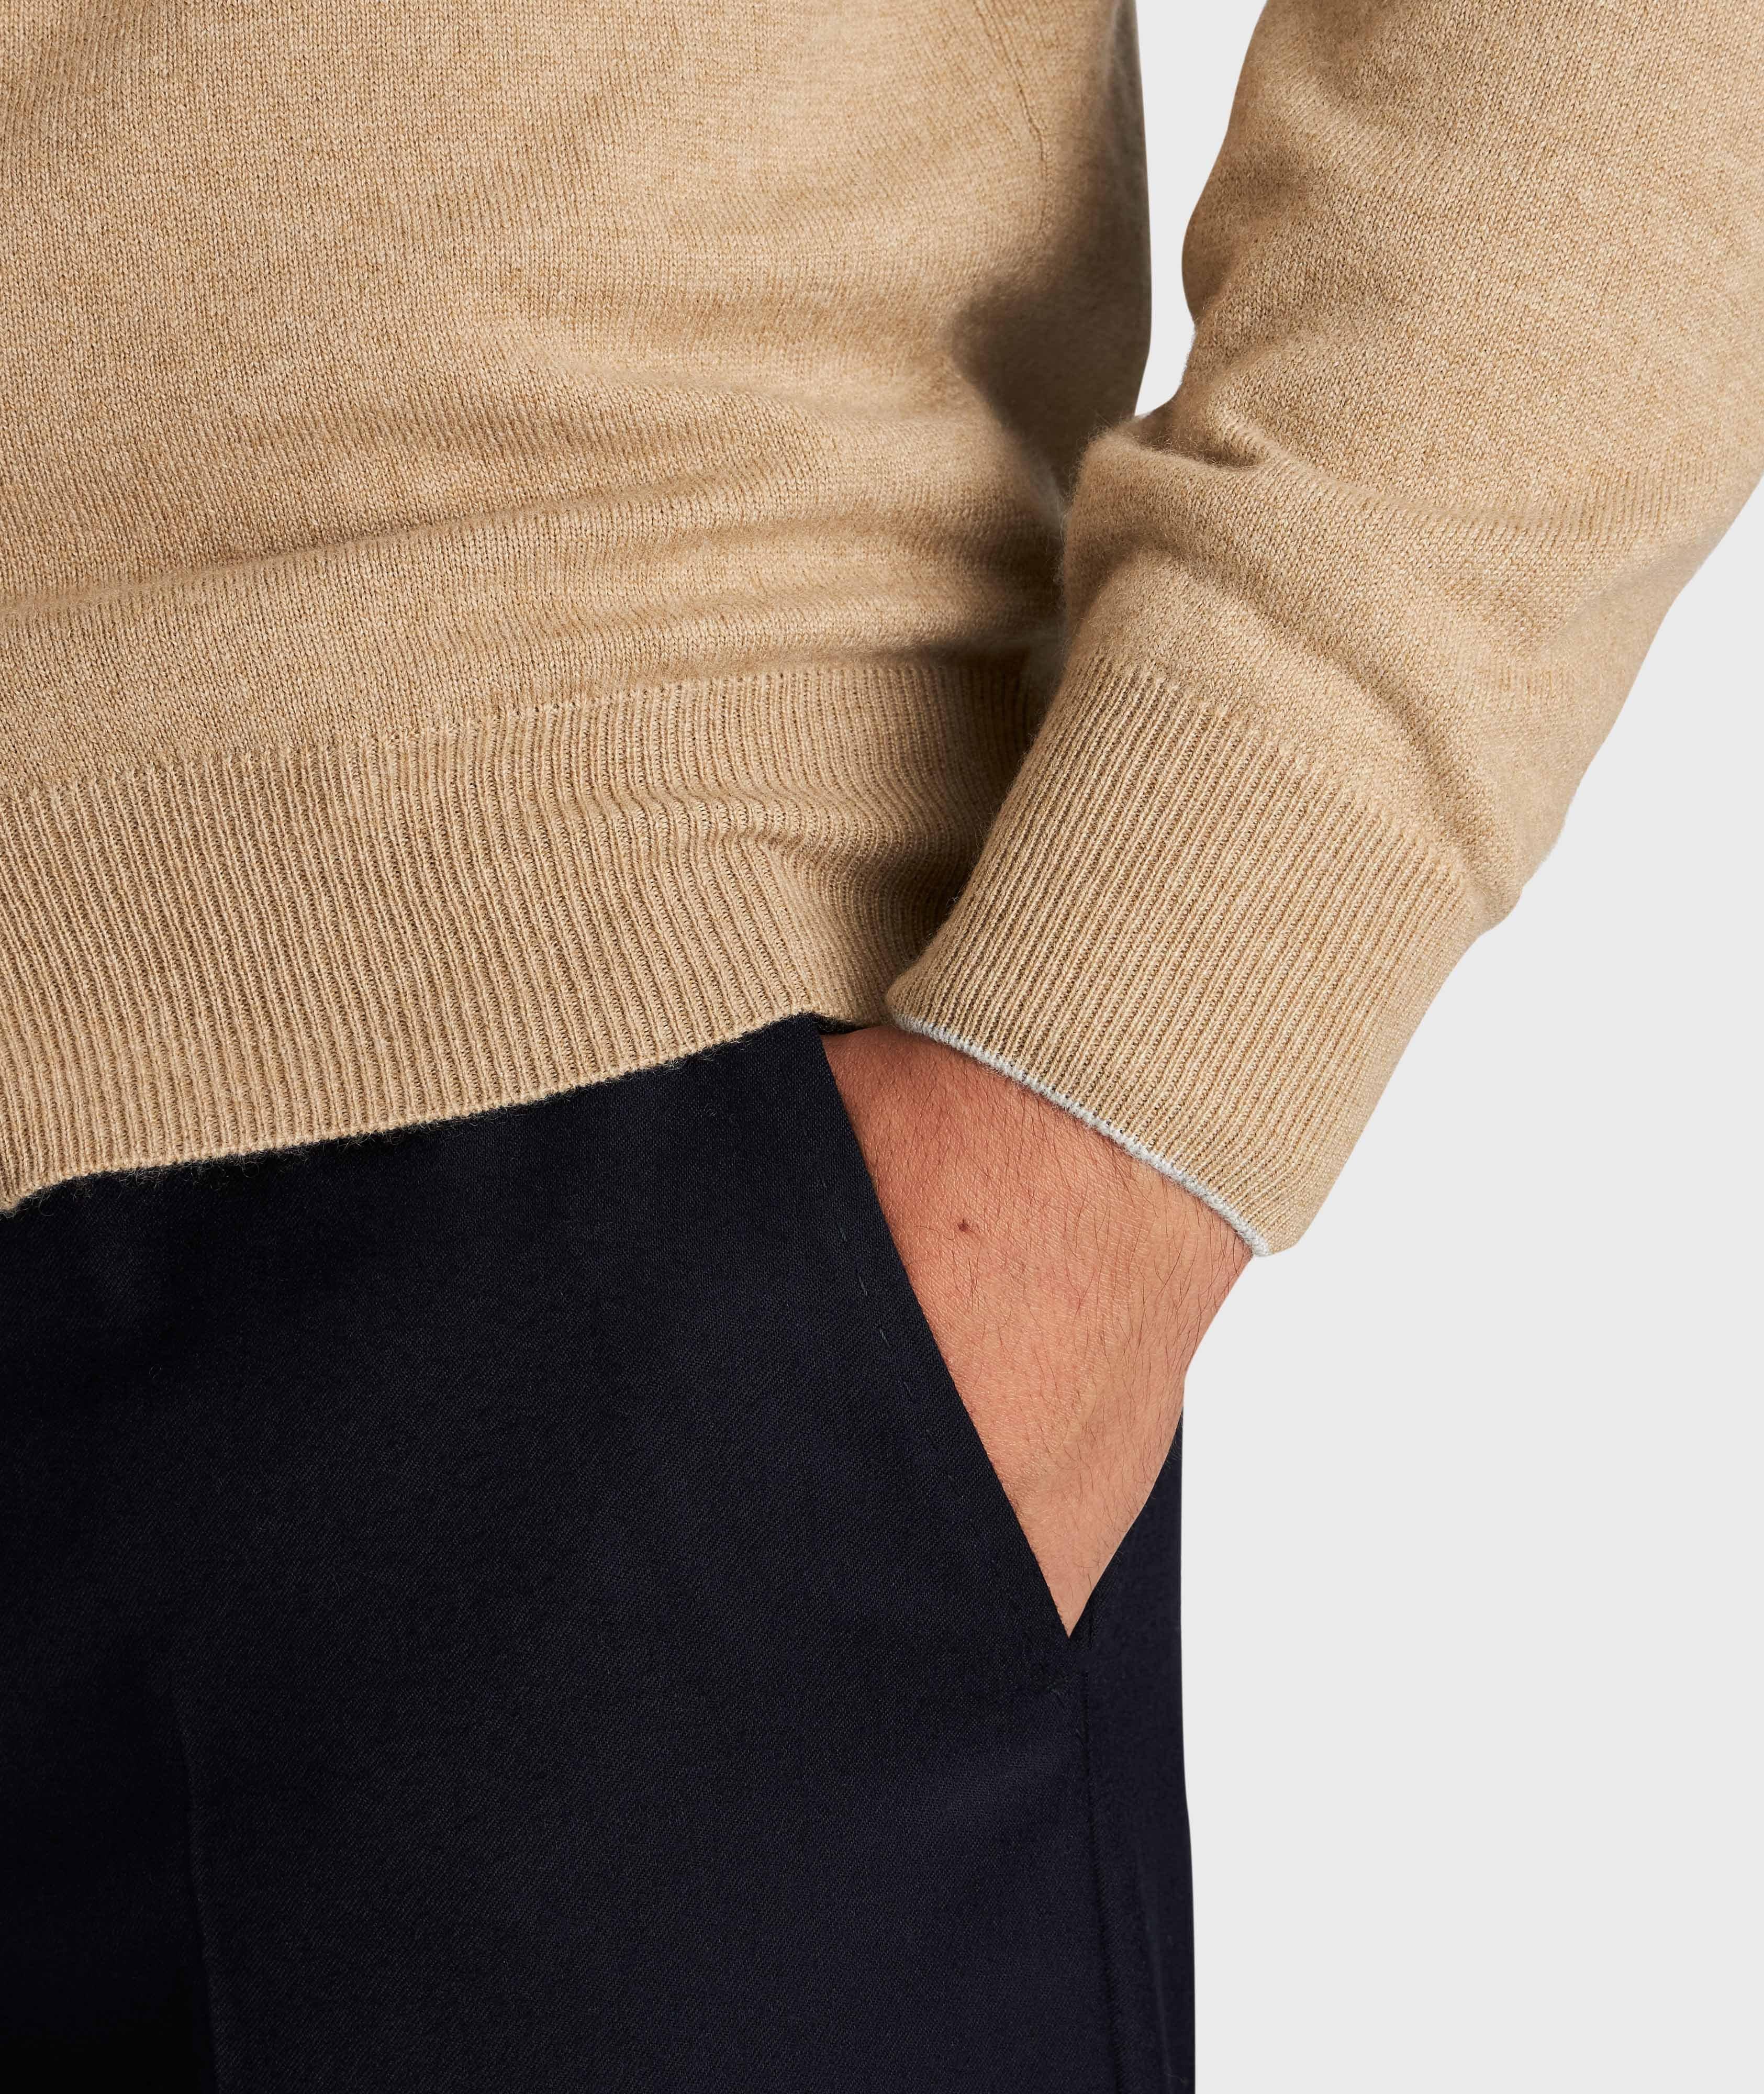 Zip-Up Cashmere Sweater image 3